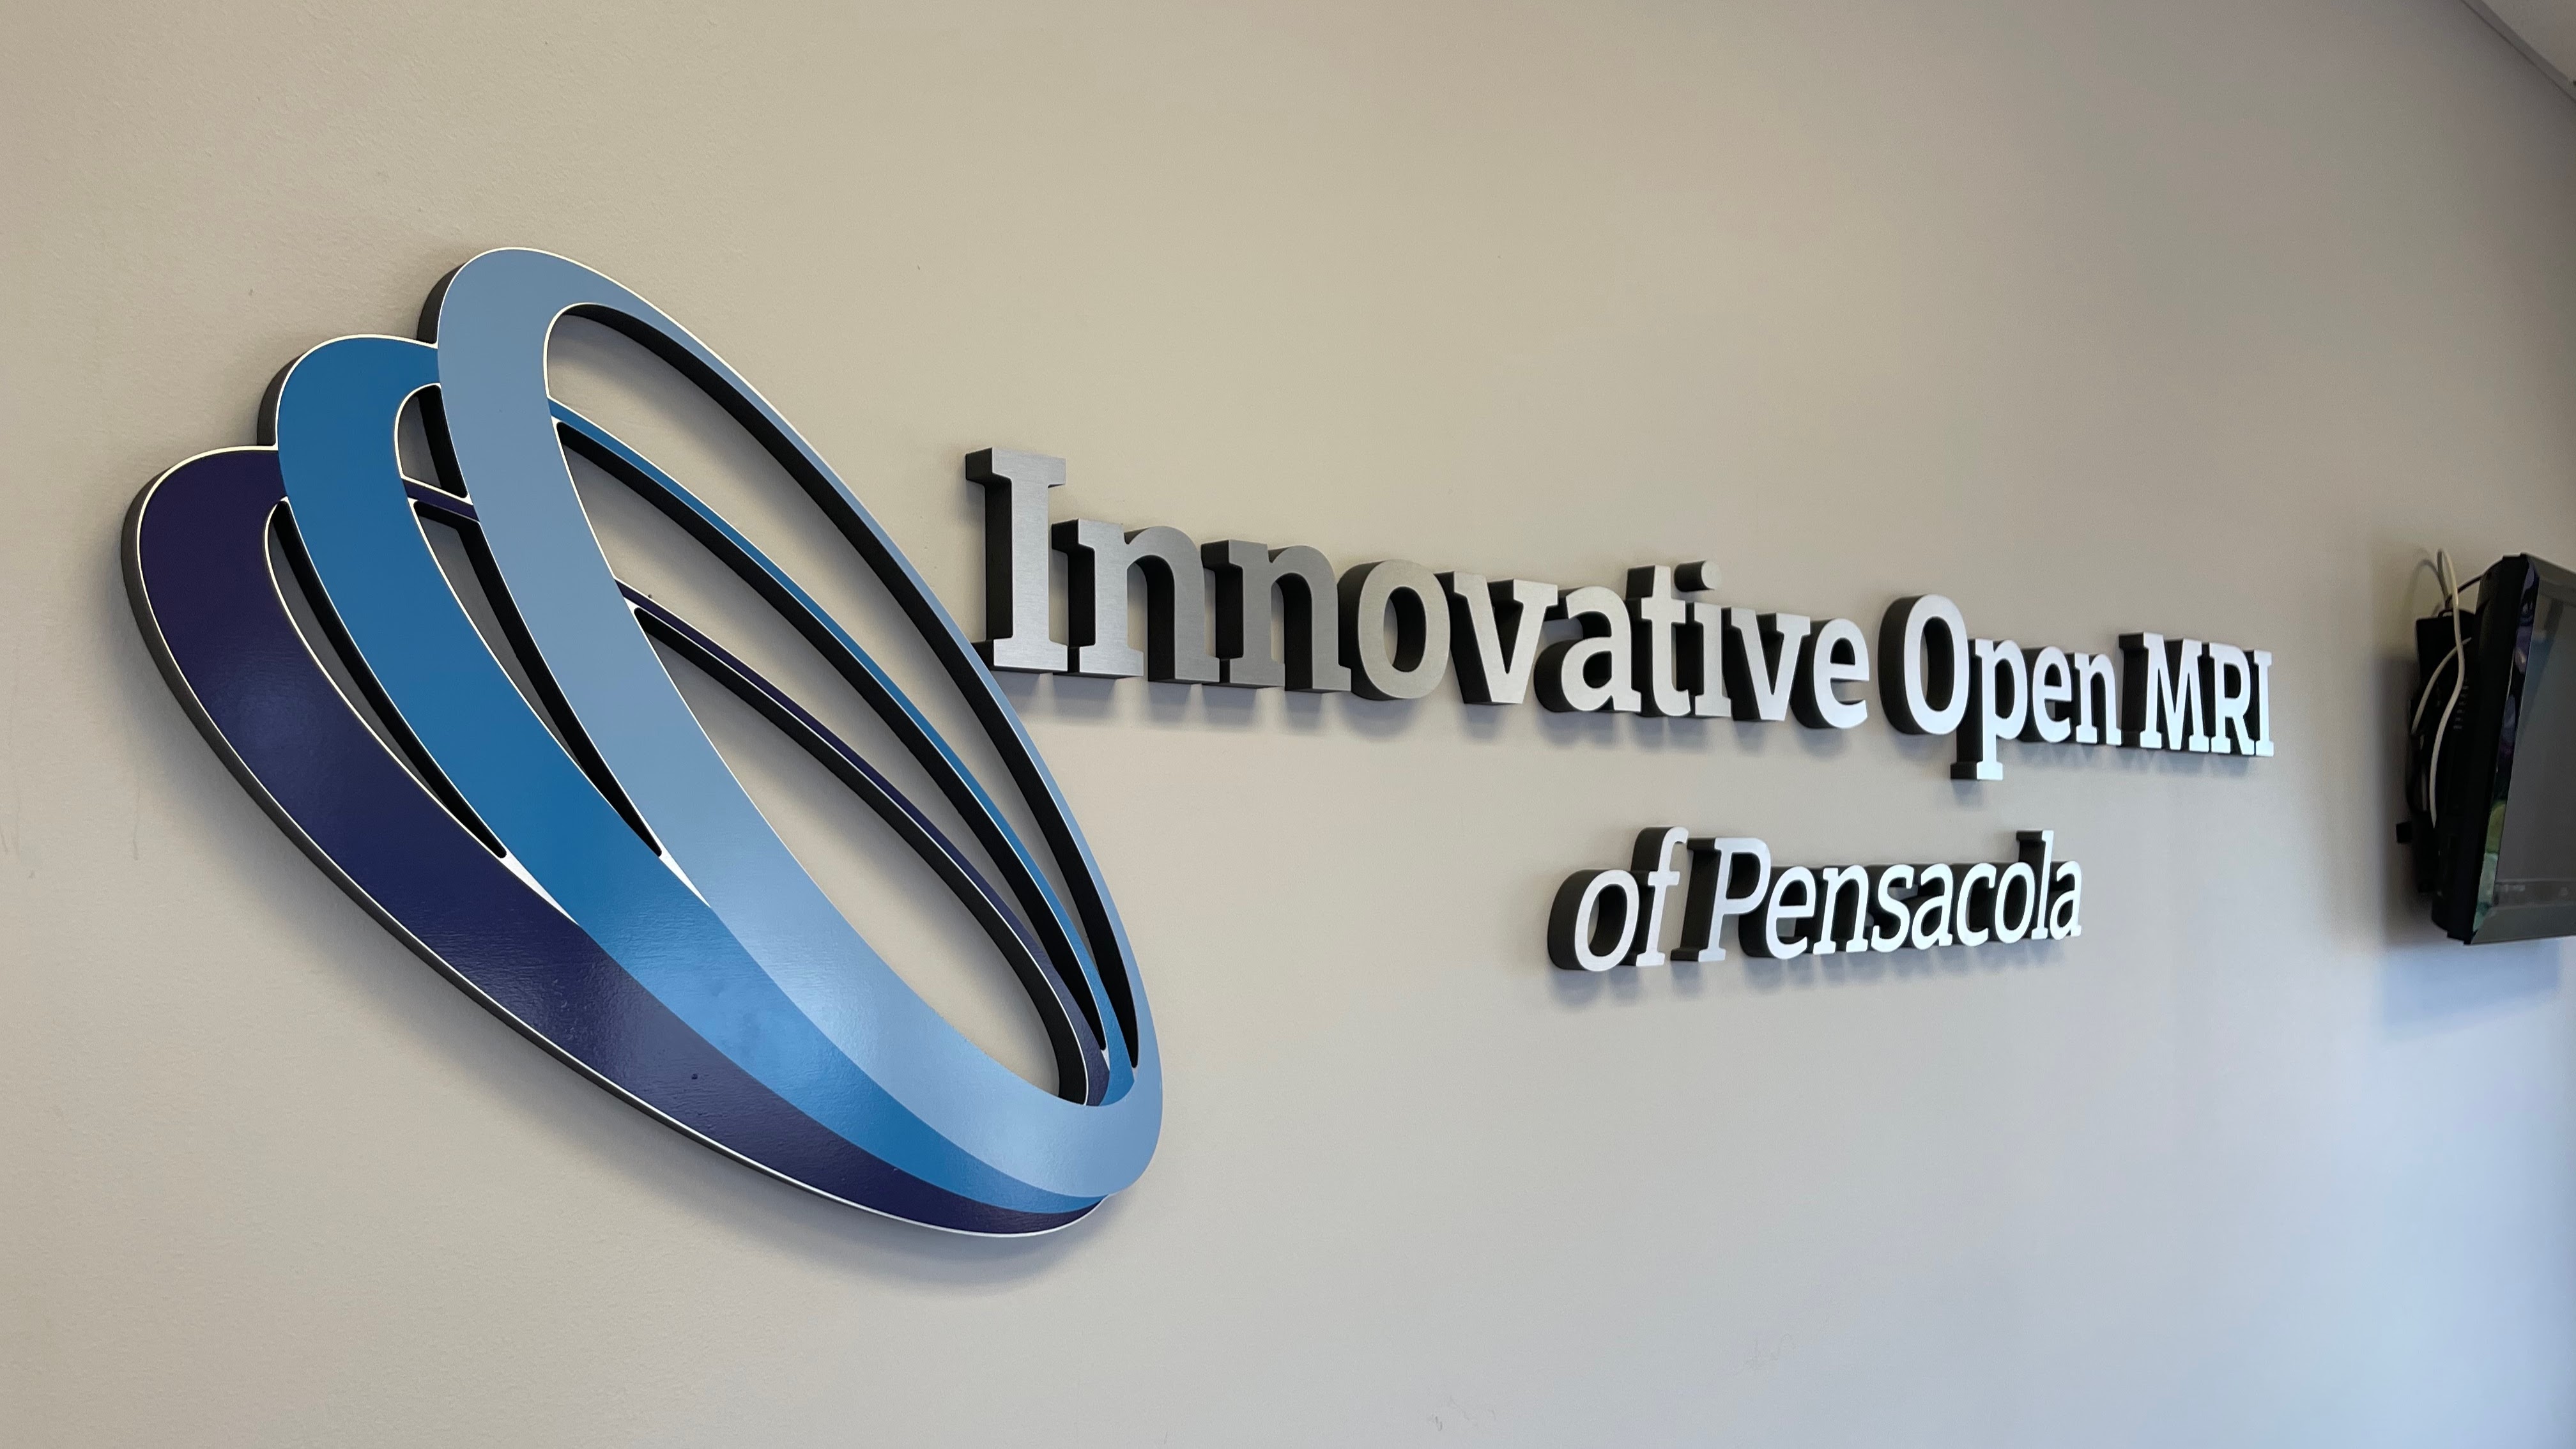 Dimensional lettering and logo for Innovative Open MRI of Pensacola office